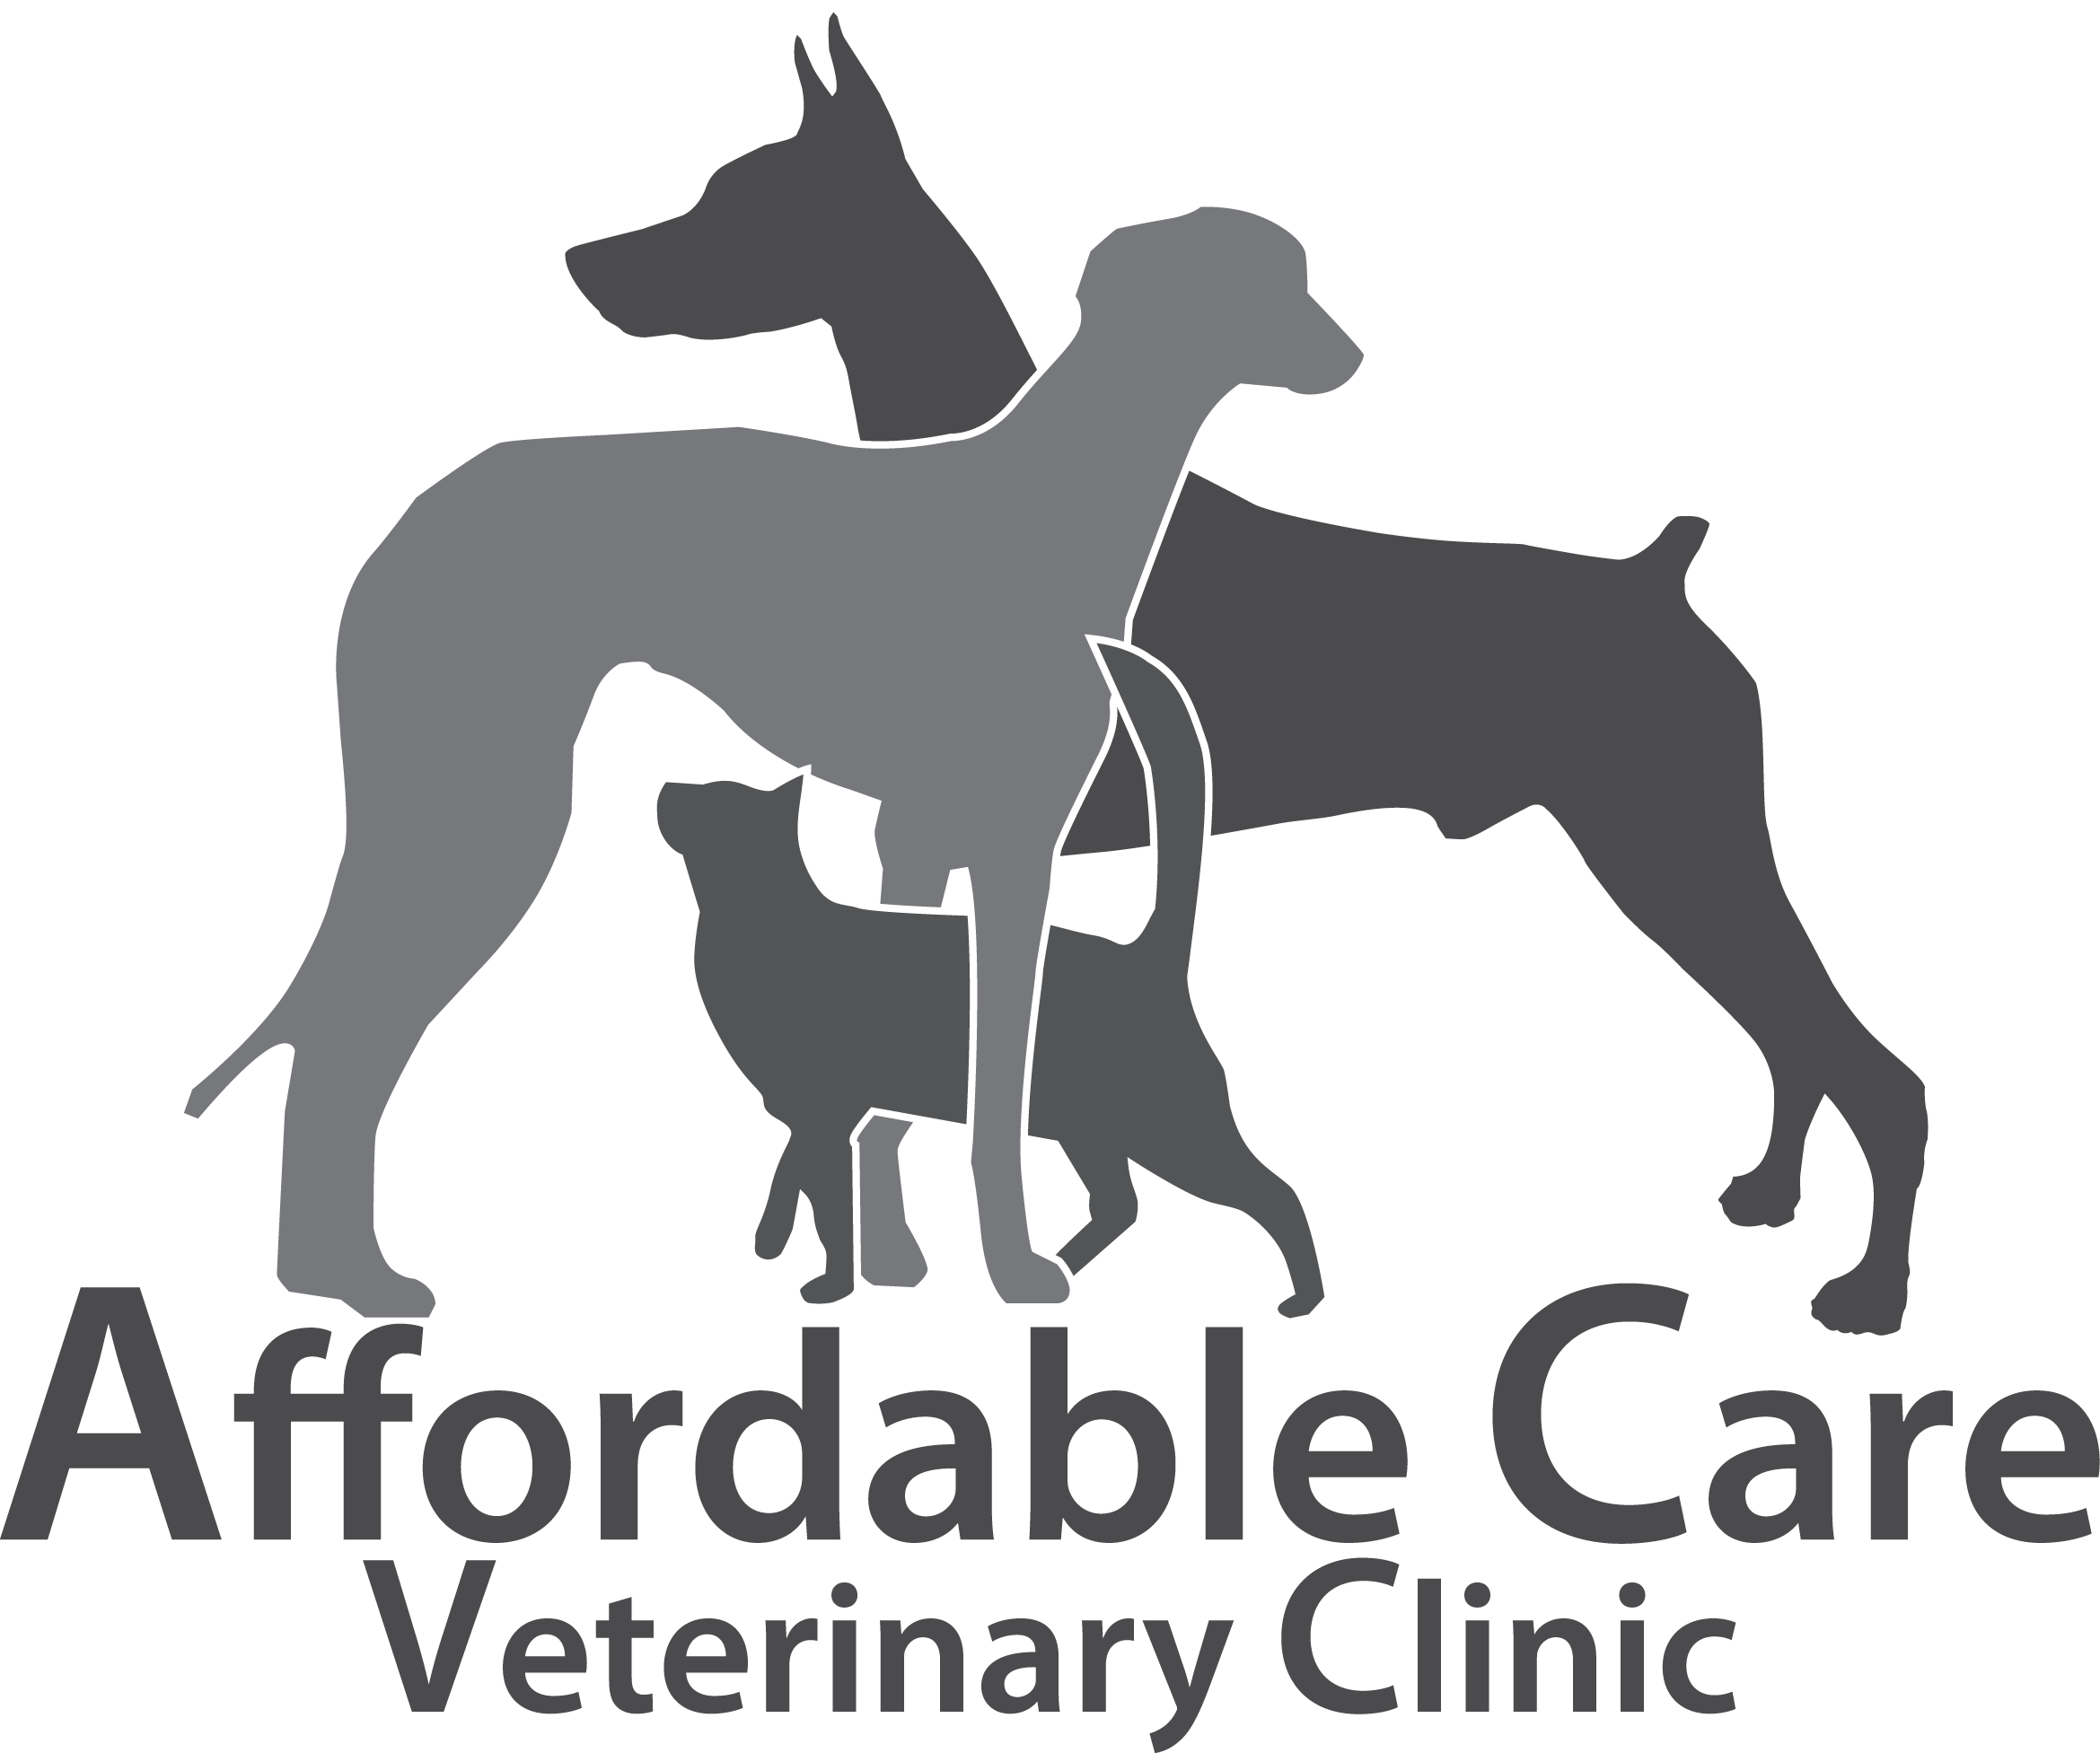 Affordable Care Veterinary Clinic Logo